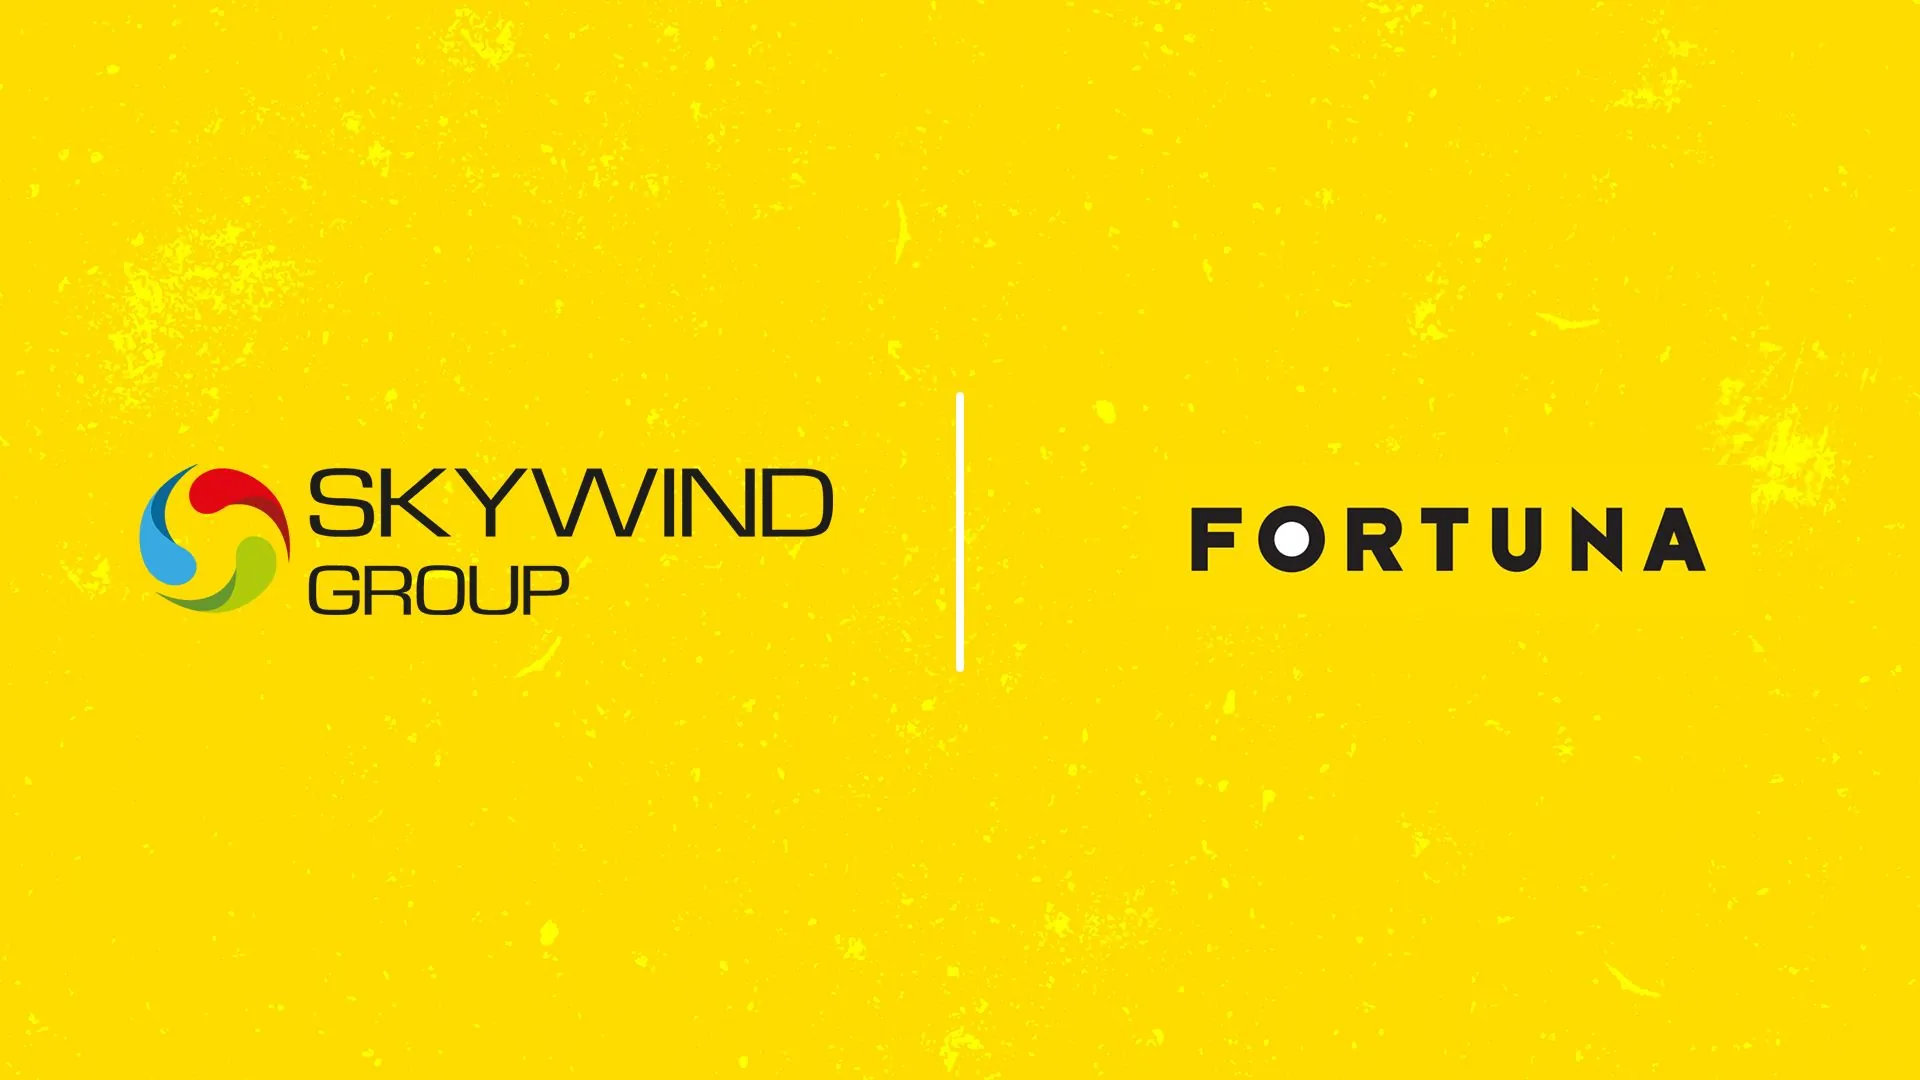 Skywind Group partners with Central and Eastern European Powerhouse Fortuna